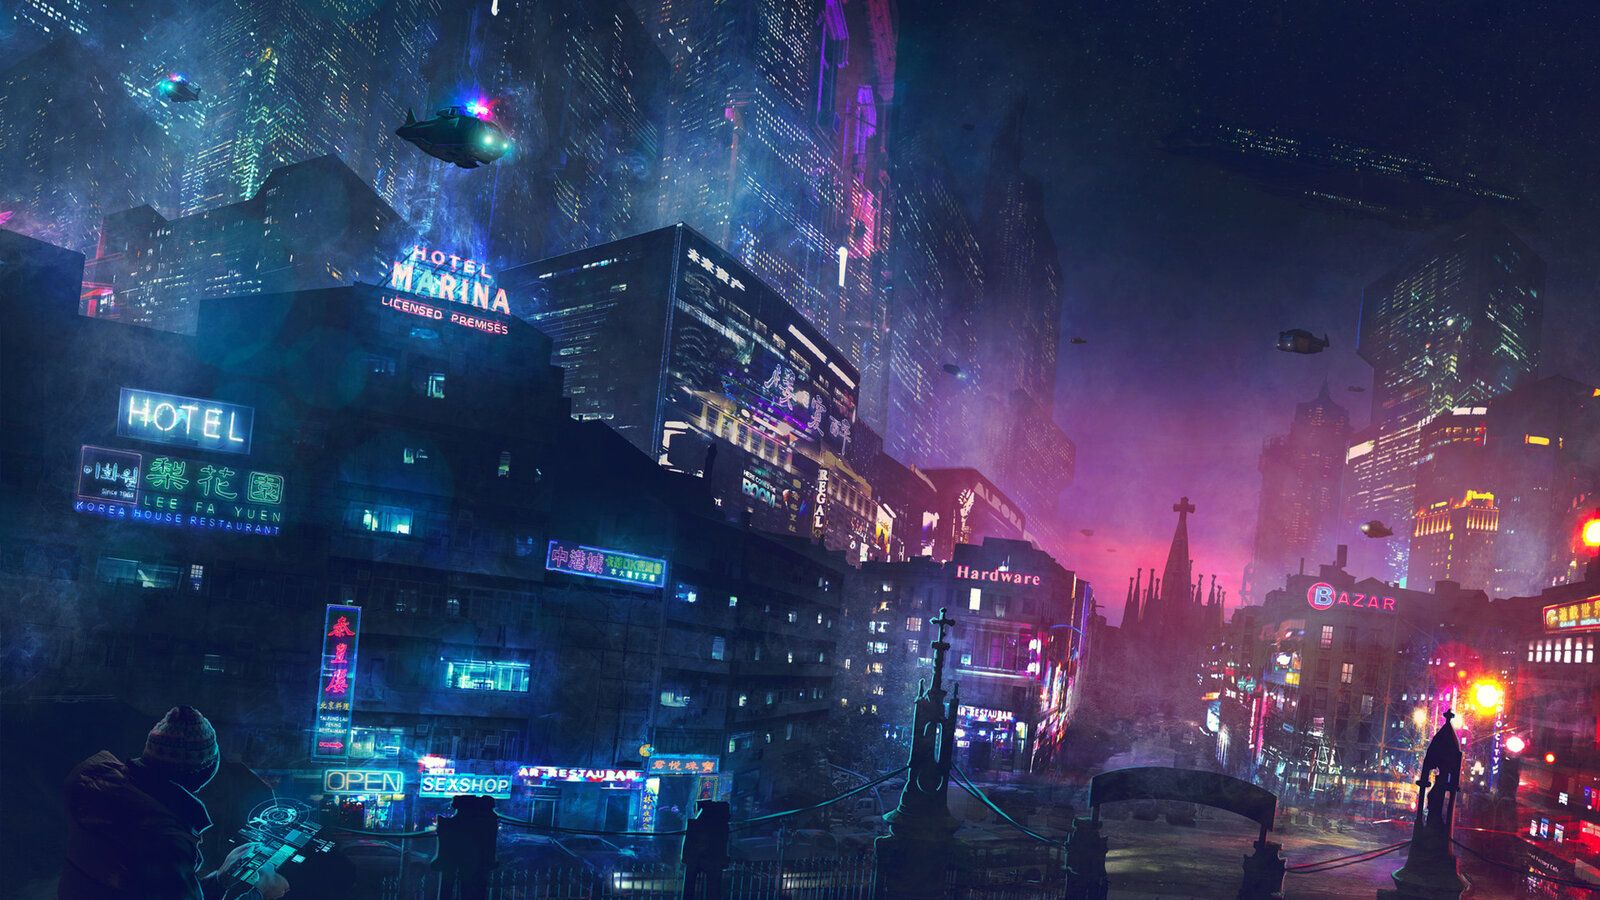 730+ Cyberpunk HD Wallpapers and Backgrounds